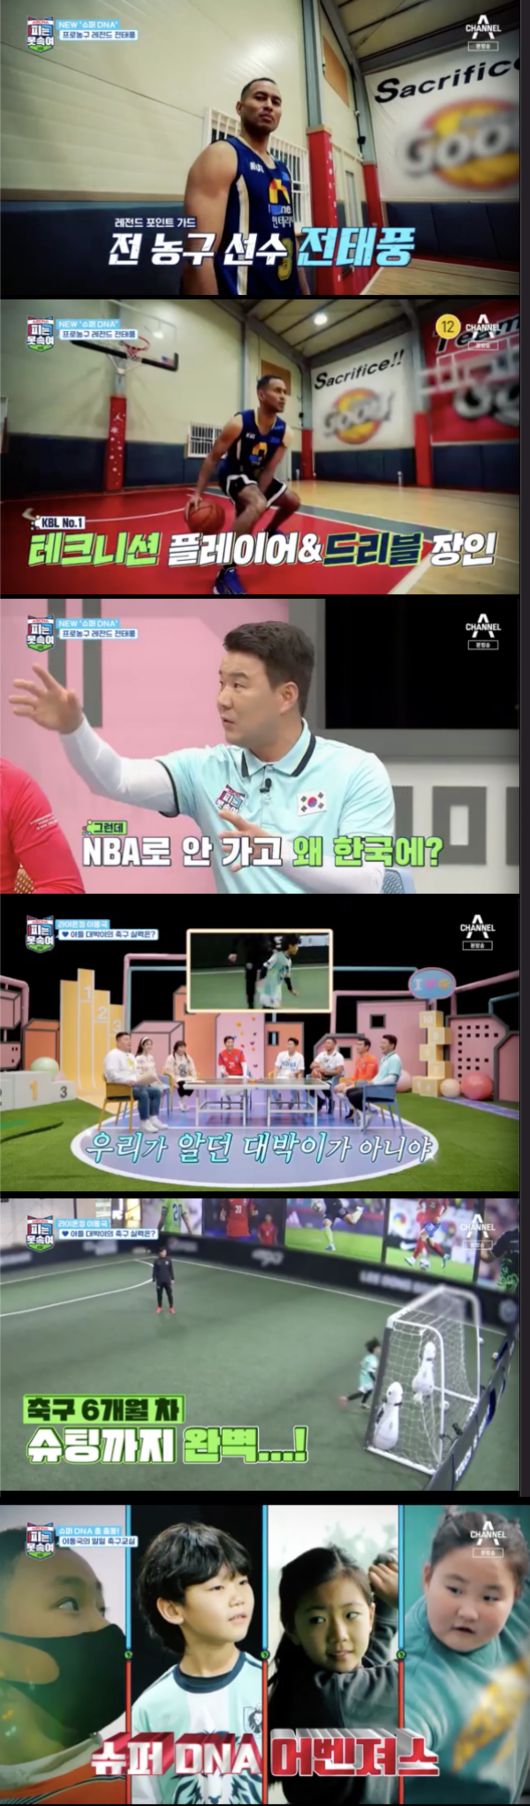 I cant cheat on blood Lee Dong-gooks son Cyan reveals dream of becoming a footballerIn the channel A entertainment program Super DNA Blood is a tricky one (abbreviated blood is not tricked), which was broadcasted at 9:50 pm on the 28th, Super DNA leaders such as Lee Dong-gook and son Cyan, Lee Hyung-taeks daughter Min-Ju, Kim Byung-hyuns daughter Min-Ju, and Cho Won-hees son Yun Jun gathered together.Tony Akins, a number one Technician player and dribble craftsman, appeared on the show. Tony Akins was applauded for his dribble with his eyes closed.Kang Ho-dong asked, Do you know what the title of our program means? Tony Akins answered correctly, Parent DNA is coming down to the children.My father played basketball in the United States until college, The Uncle, my fathers younger brothers played basketball, all positions were guard, Tony Akins said.Tony Akins said: Ive been a mercenary for seven years after my failed NBA career; Ive played in Russia, Europe, and so on, and Ive had a goal of playing for my mothers national team.The final destination was Korea, he said.Lee Dong-gook and son Cyan, who turned nine, were on the air; Lee Dong-gook spent time training for football with Son.Cyan nodded to the question Are you going to play soccer? and replied, I will.Kim Byung-hyuns daughter Min-Ju and Lee Hyung-taeks daughter Mina visited Lee Dong-gooks soccer academy.Kim Byung-hyun said, Since soccer is a group exercise, I have come to see that it will help me to develop cooperation rather than personal exercise and to have a lower body-oriented body.Cho Won-hee and Yun Jun also visited Academi, where the super DNA leaders gathered in one place.Mina was interested in Cho Won-hees son Yun jun, saying, Hes handsome; hes better than Father (Cho Won-hee).I came to the East, The Uncle, because I wanted to learn football, Yun Jun said.Youre a good football player, he said with a pleasant smile, and Yun Jun replied, Dongguk The Uncle is better.Lee Dong-gook looked at Yun jun and said, I just want to teach you when I see these friends with a lantern full of soccer passion.Channel A I cant cheat on blood broadcast screen capture